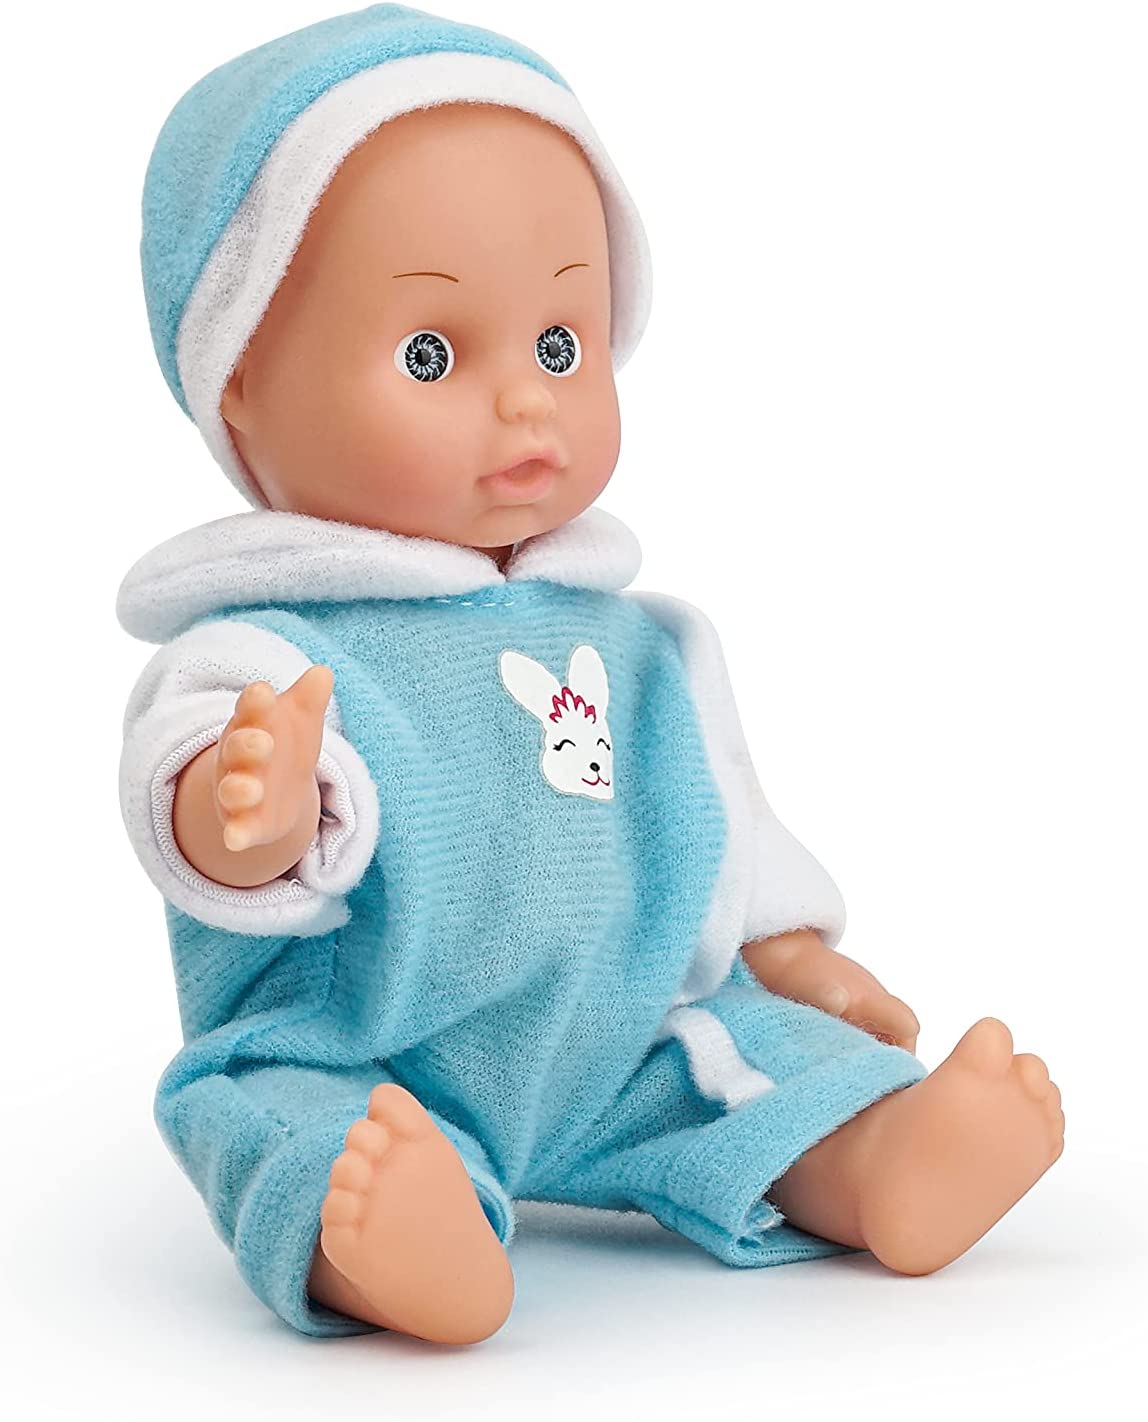 Baby Doll7.5 Inch Talking Baby Doll for kids, with Sound Effect, Removable  Outfit and Hat, for 2 Years Old Boys and Girls Gift